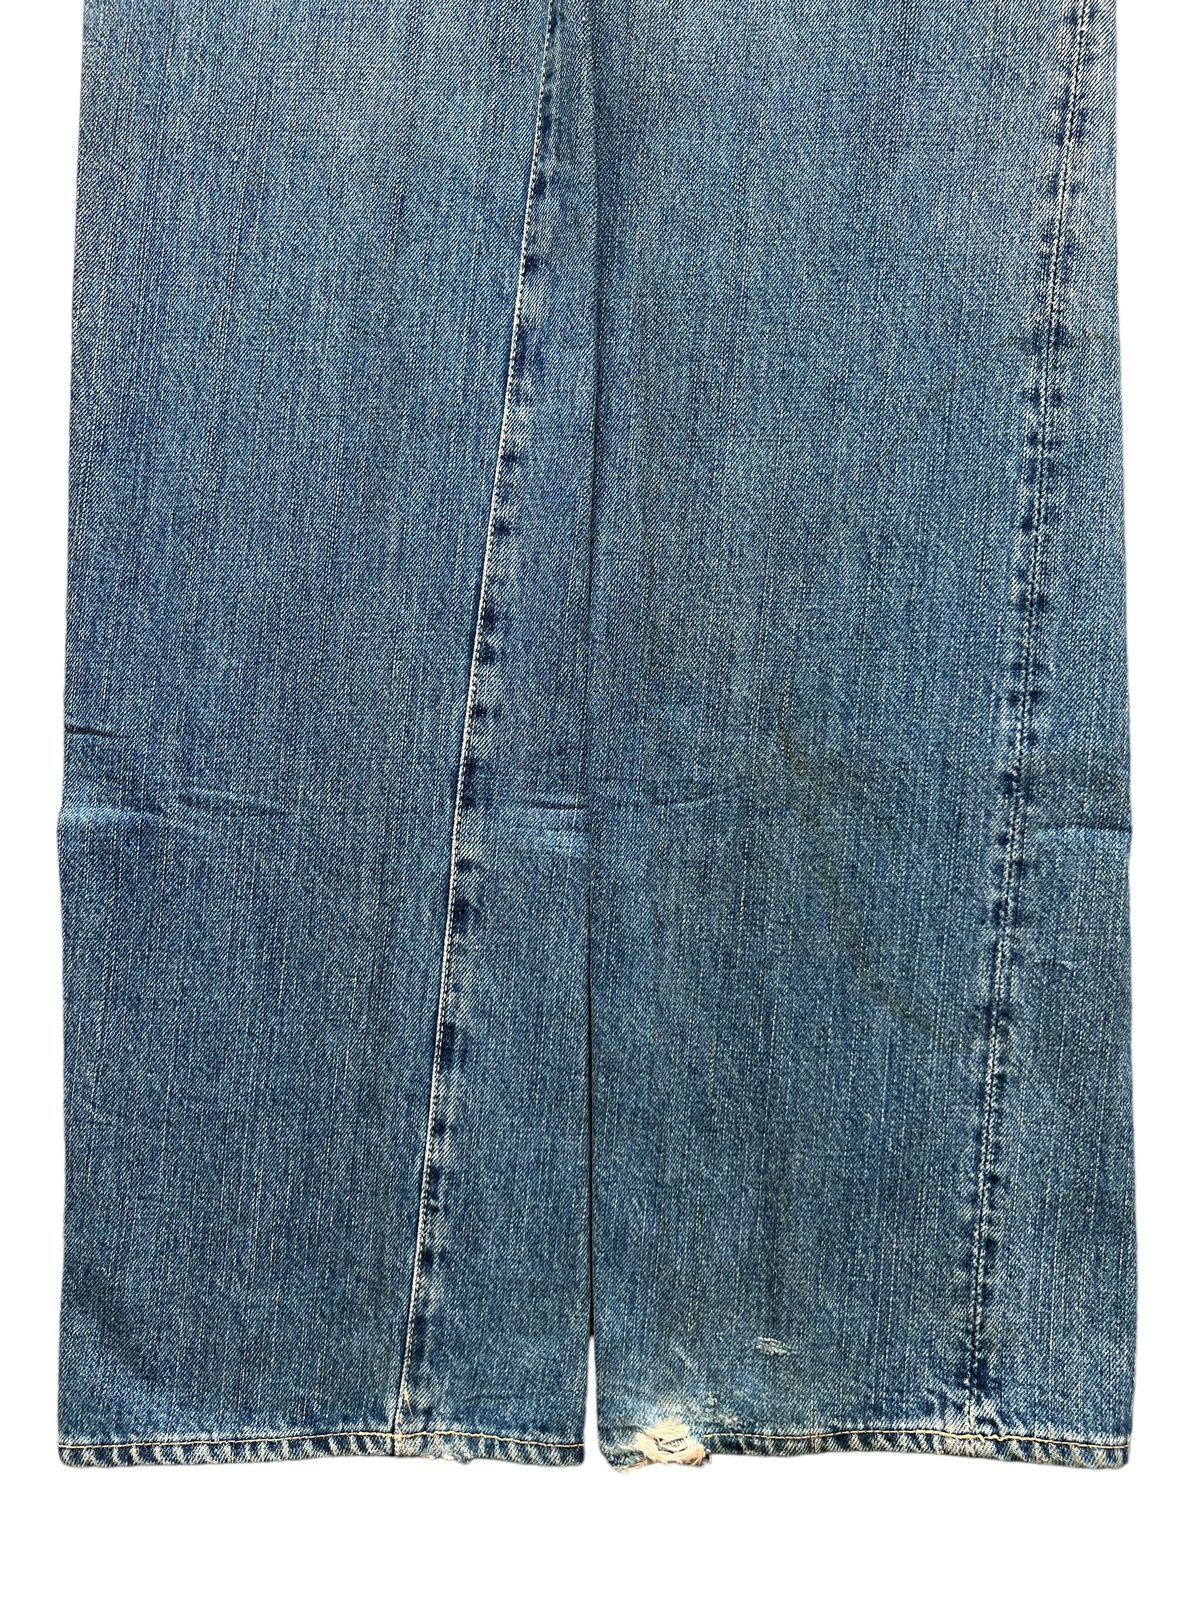 Vintage 45Rpm Japan Faded Distressed Baggy Jeans 26x33 - 7